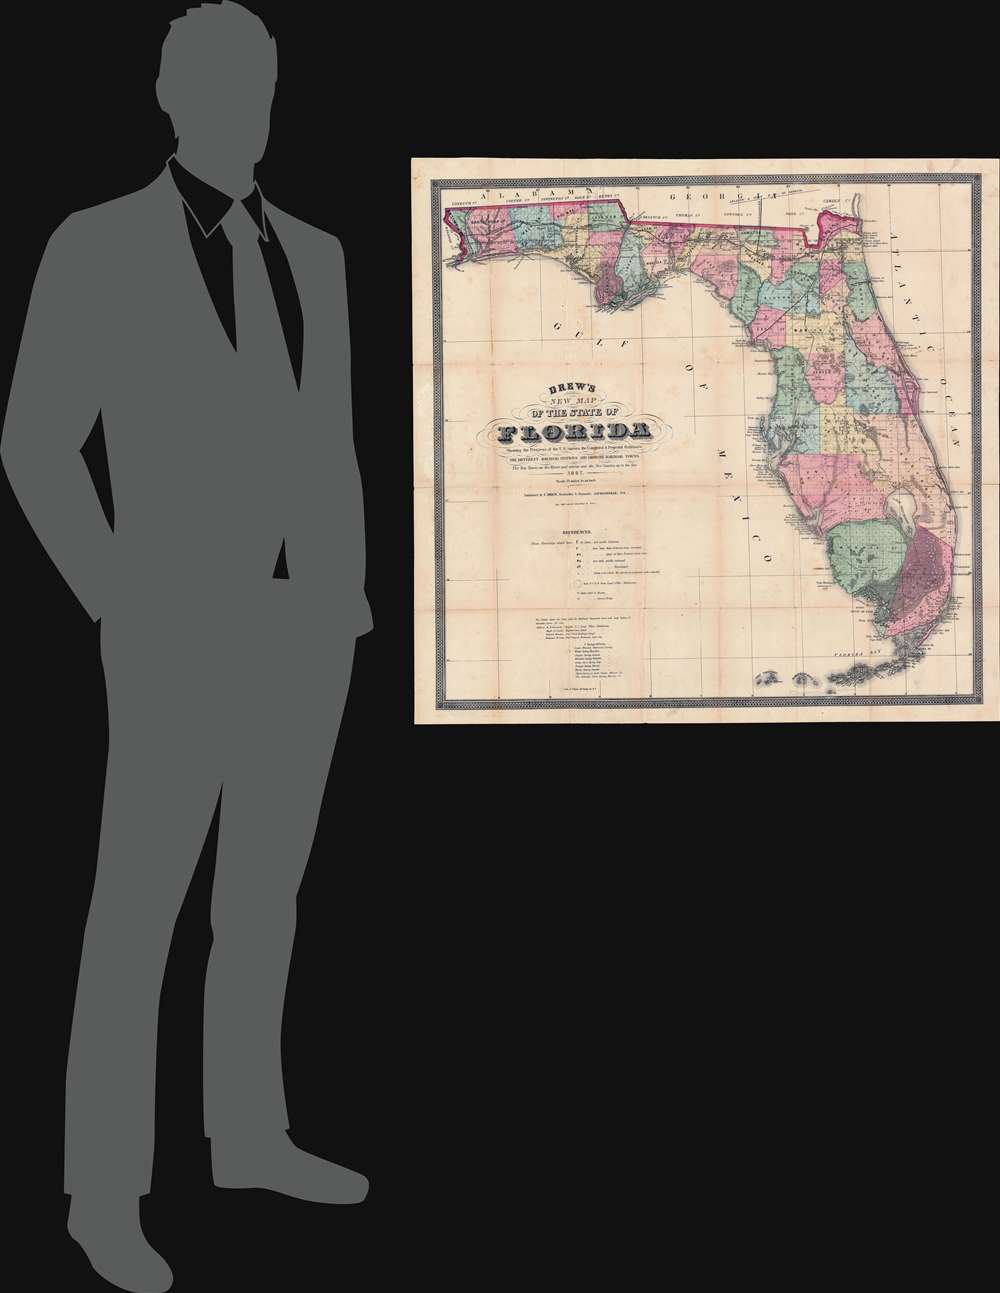 Drew's New Map of the State of Florida Showing the Progress of the U.S. Surveys, the Completed and Projected Railroads, the Different Railroad Stations and Growing Railroad Towns, the New Towns on the Rivers and Interior, and the New Counties up to the Year 1867. - Alternate View 3